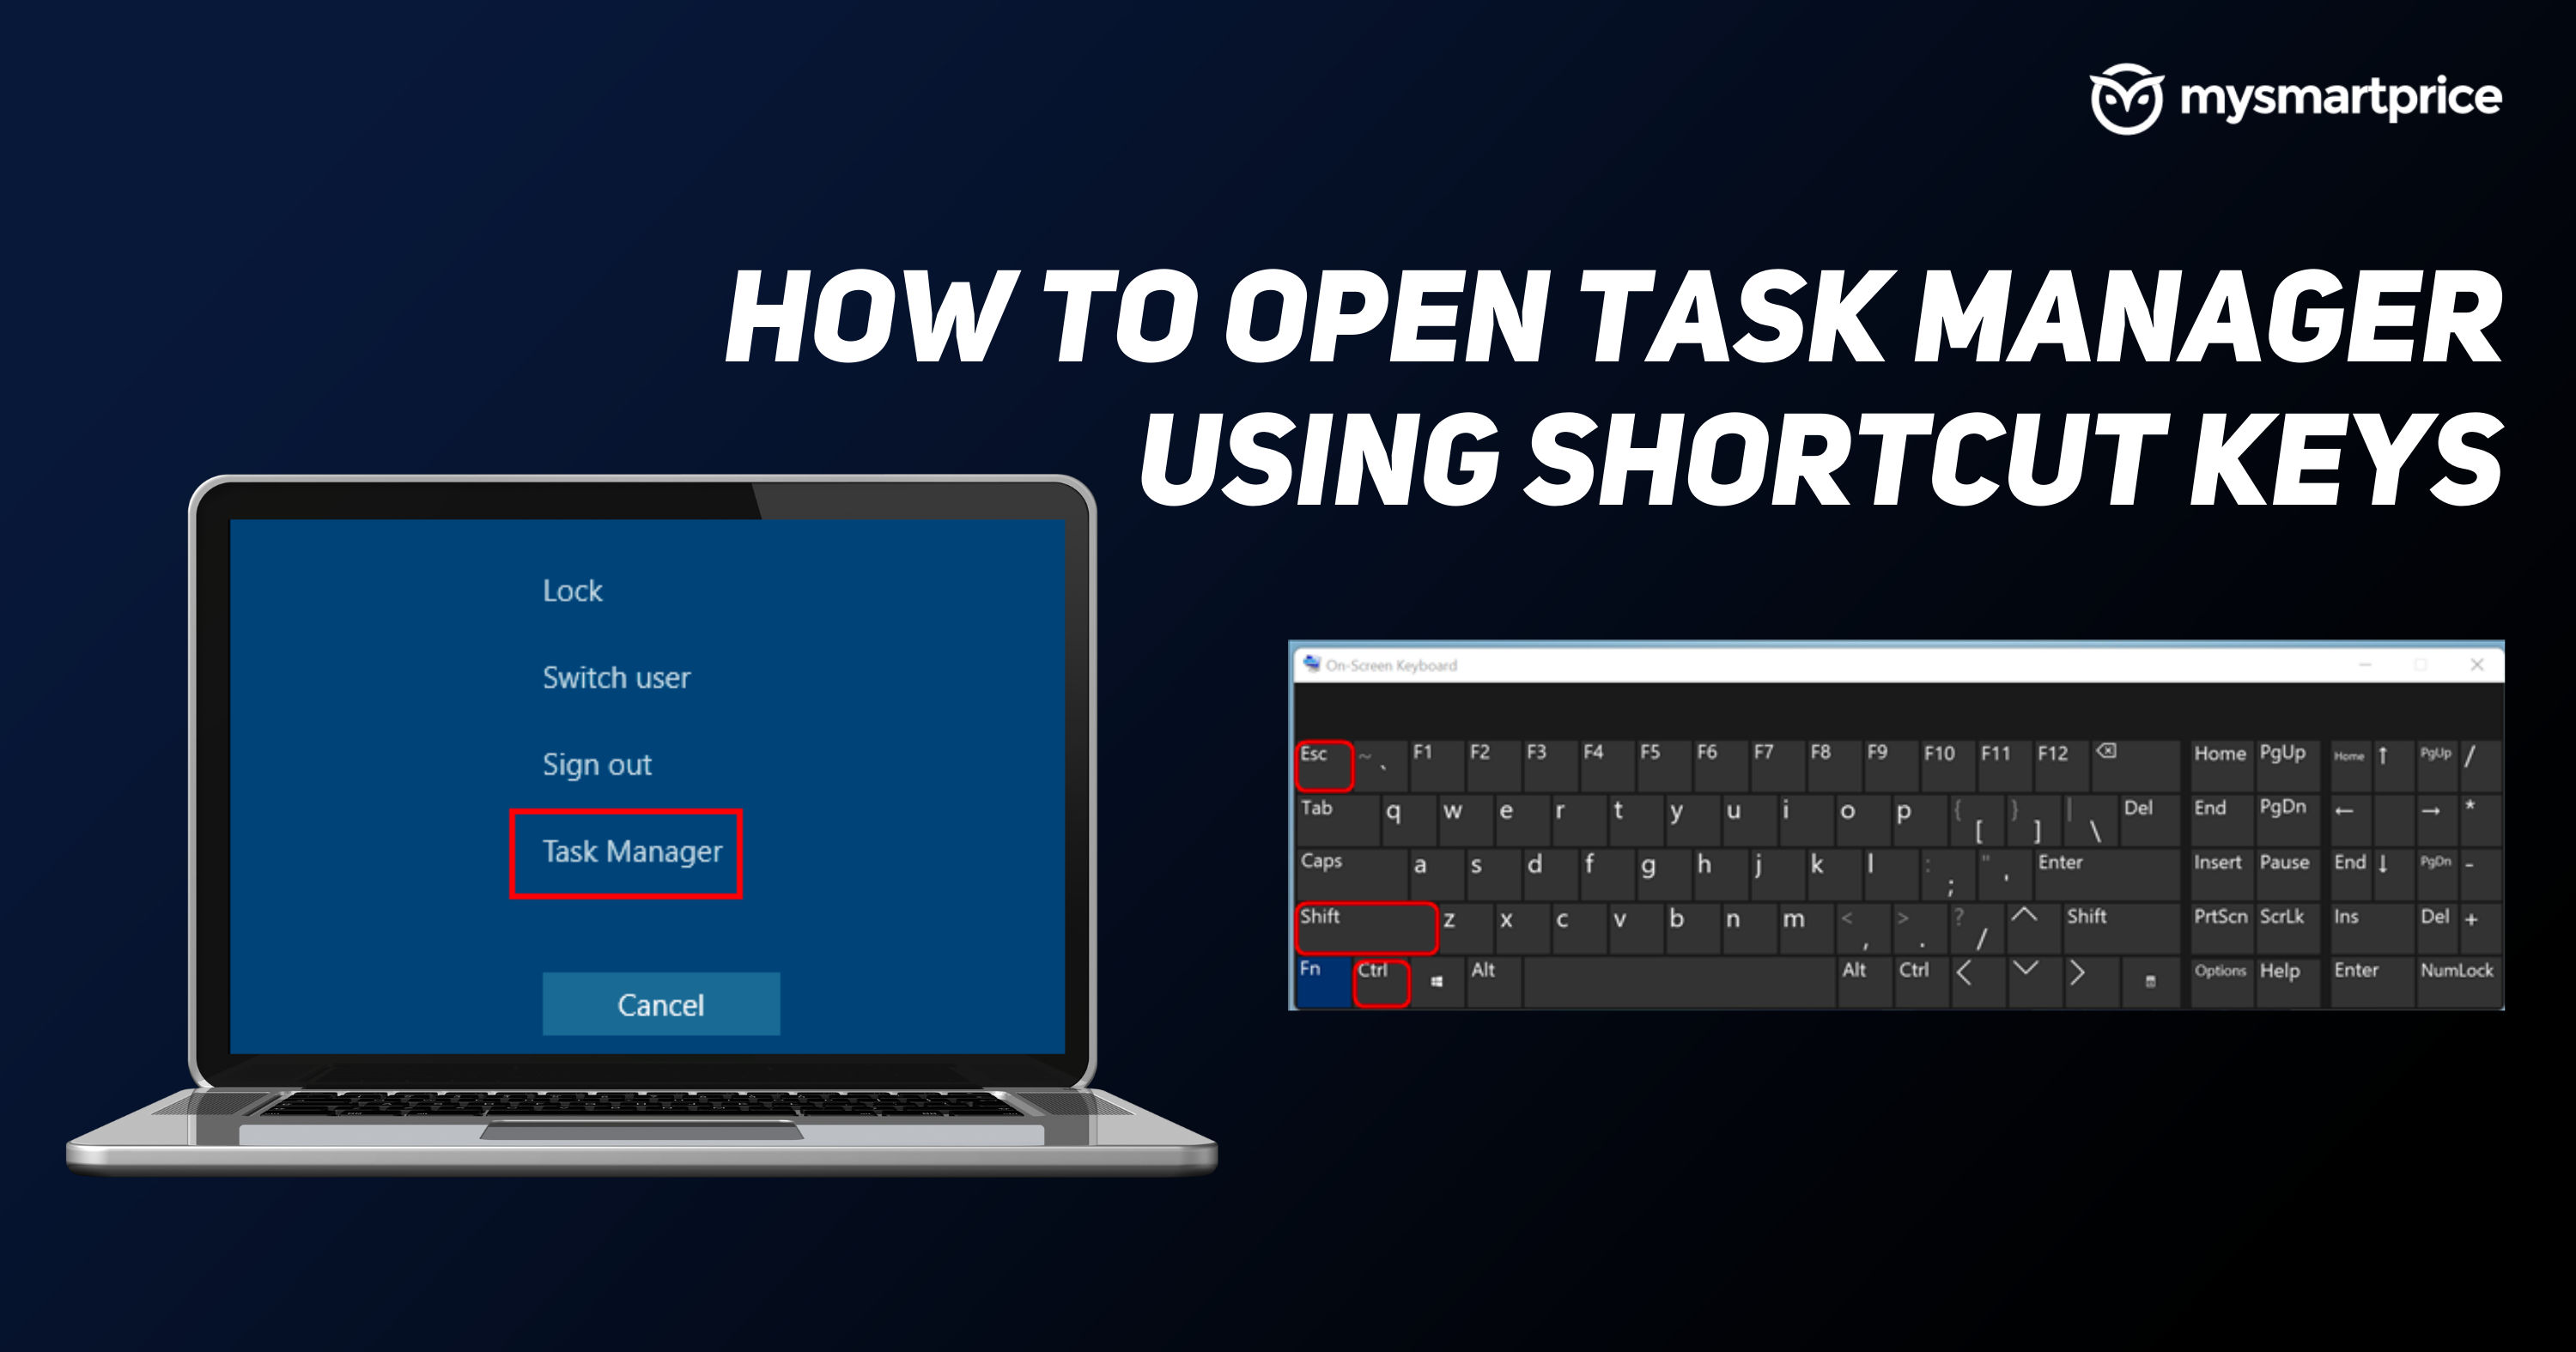 Press Ctrl+Shift+Esc to open Task Manager
Switch to the Startup tab